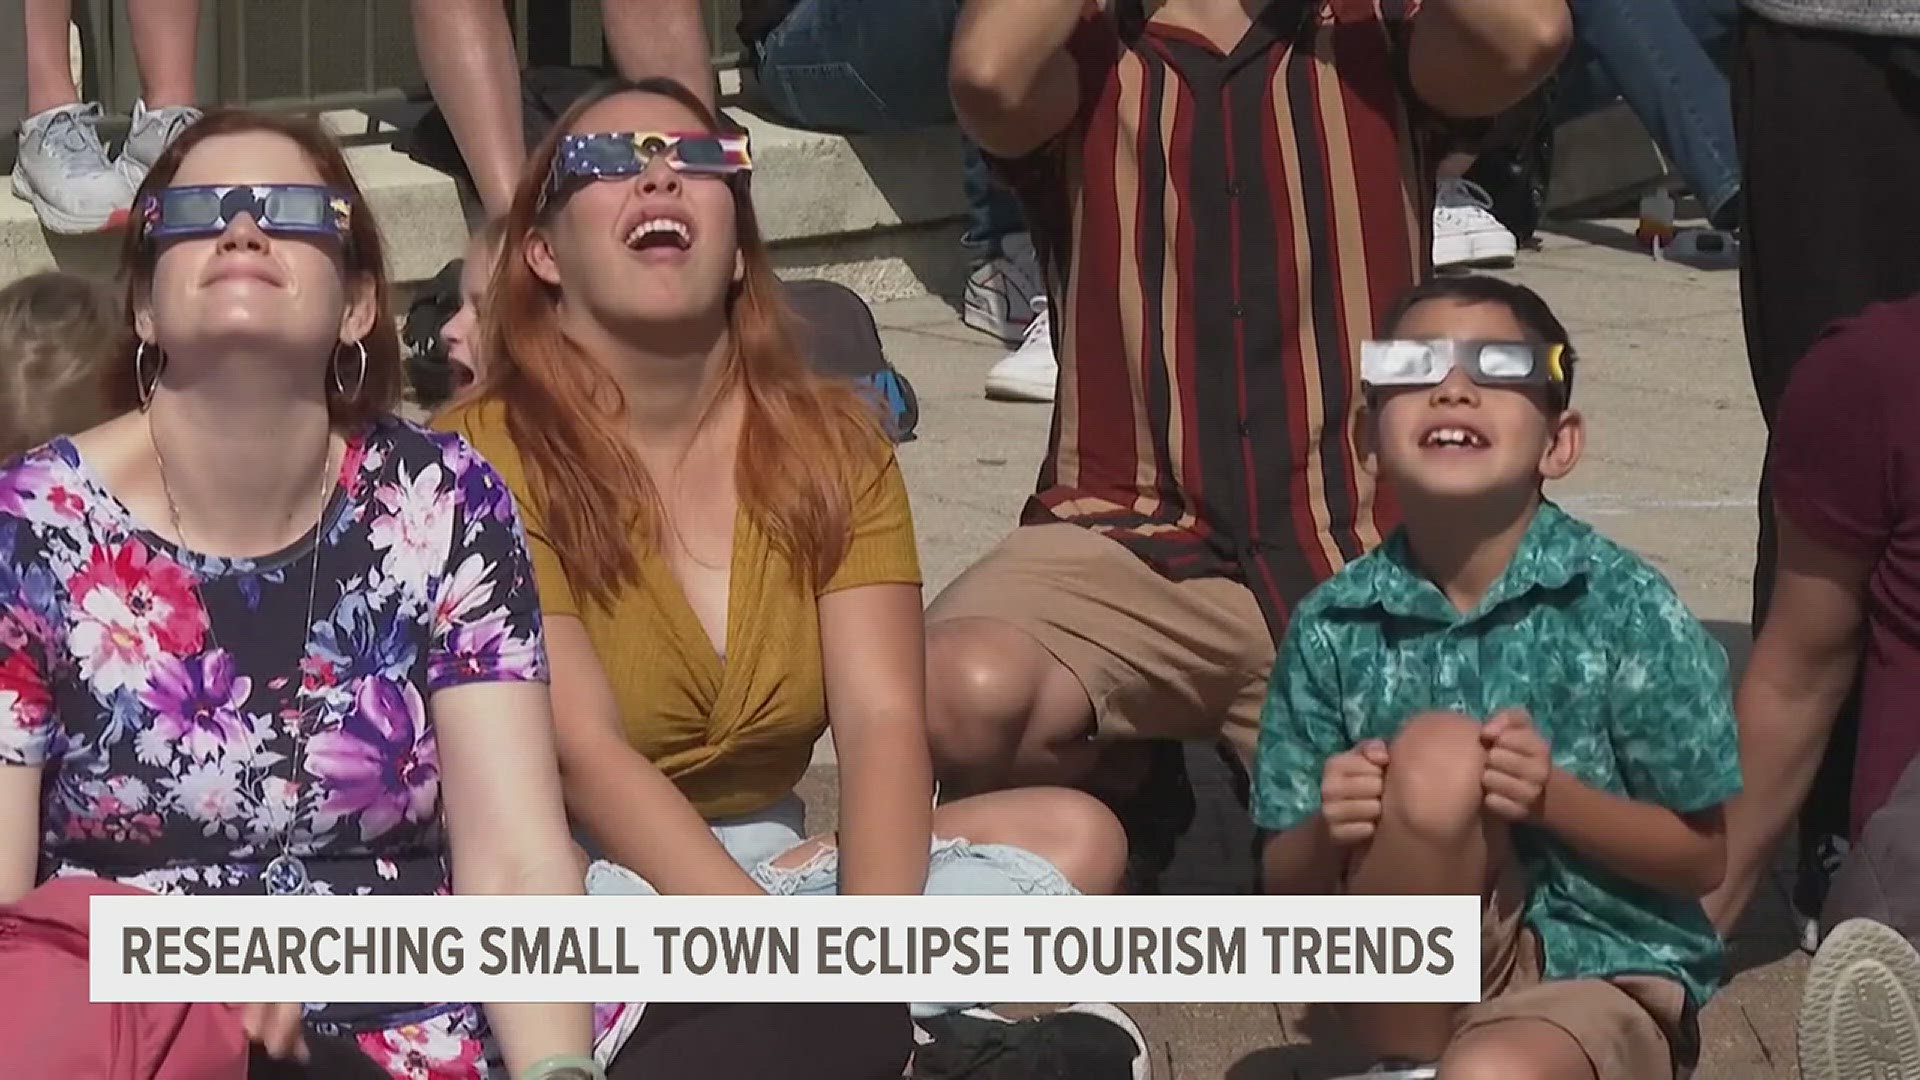 Just like during 2017's solar eclipse, the team will mine social media data to study tourism in small communities where not much data already exists.